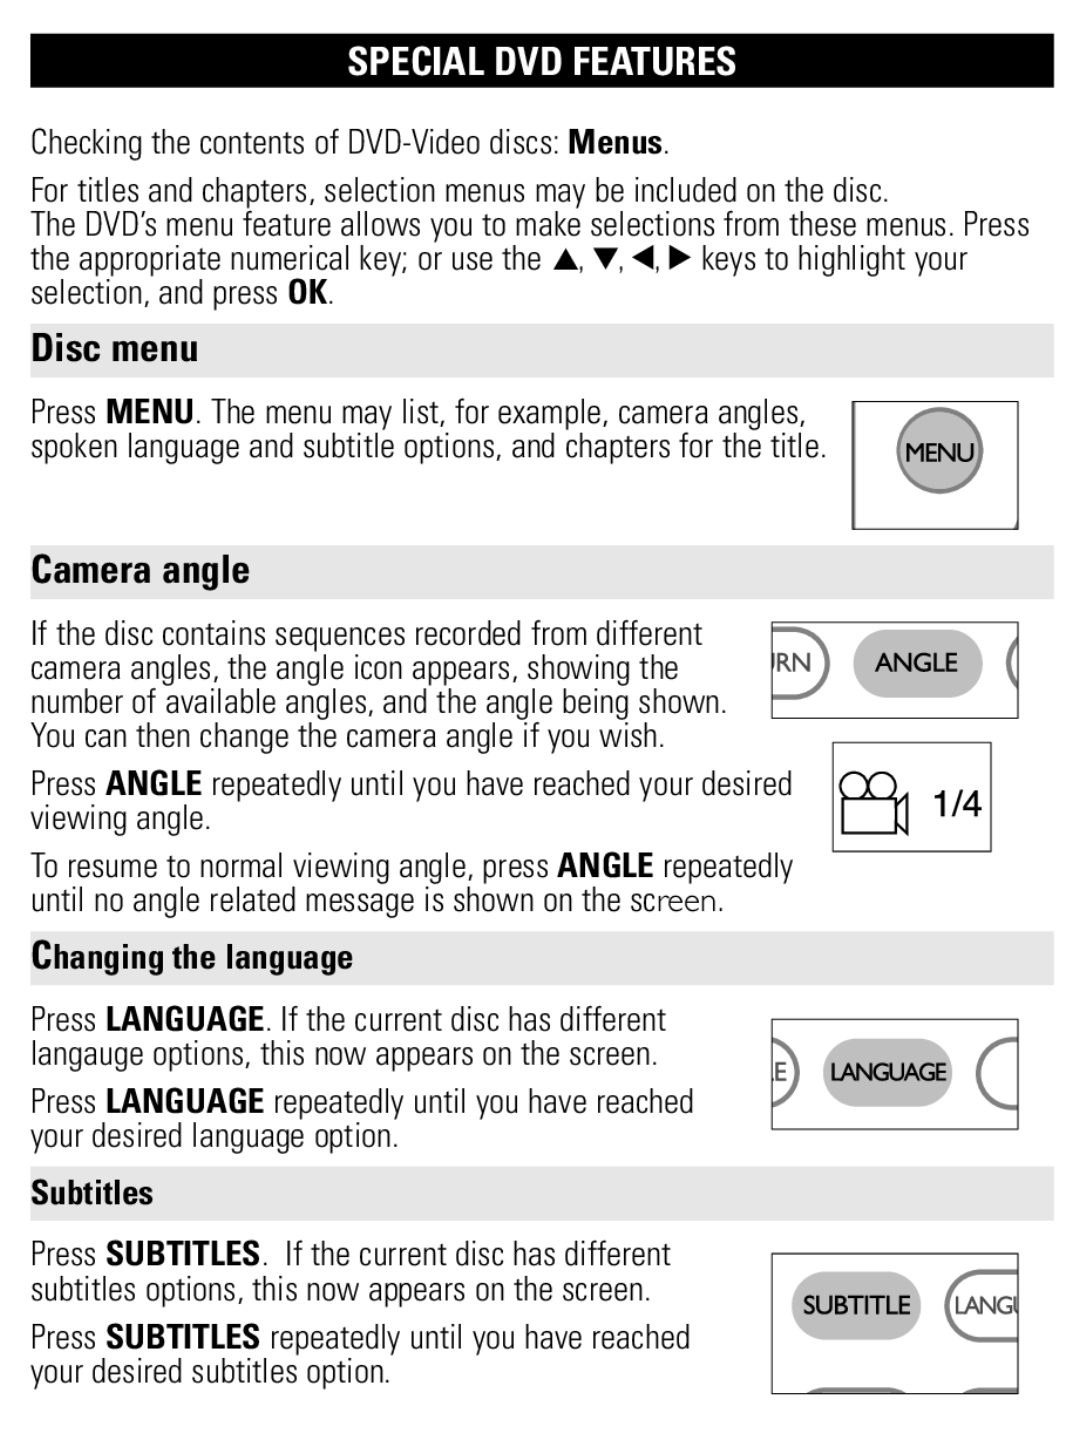 Philips PET1002 user manual Special Dvd Features, Disc menu, Camera angle, Changing the language, Subtitles 